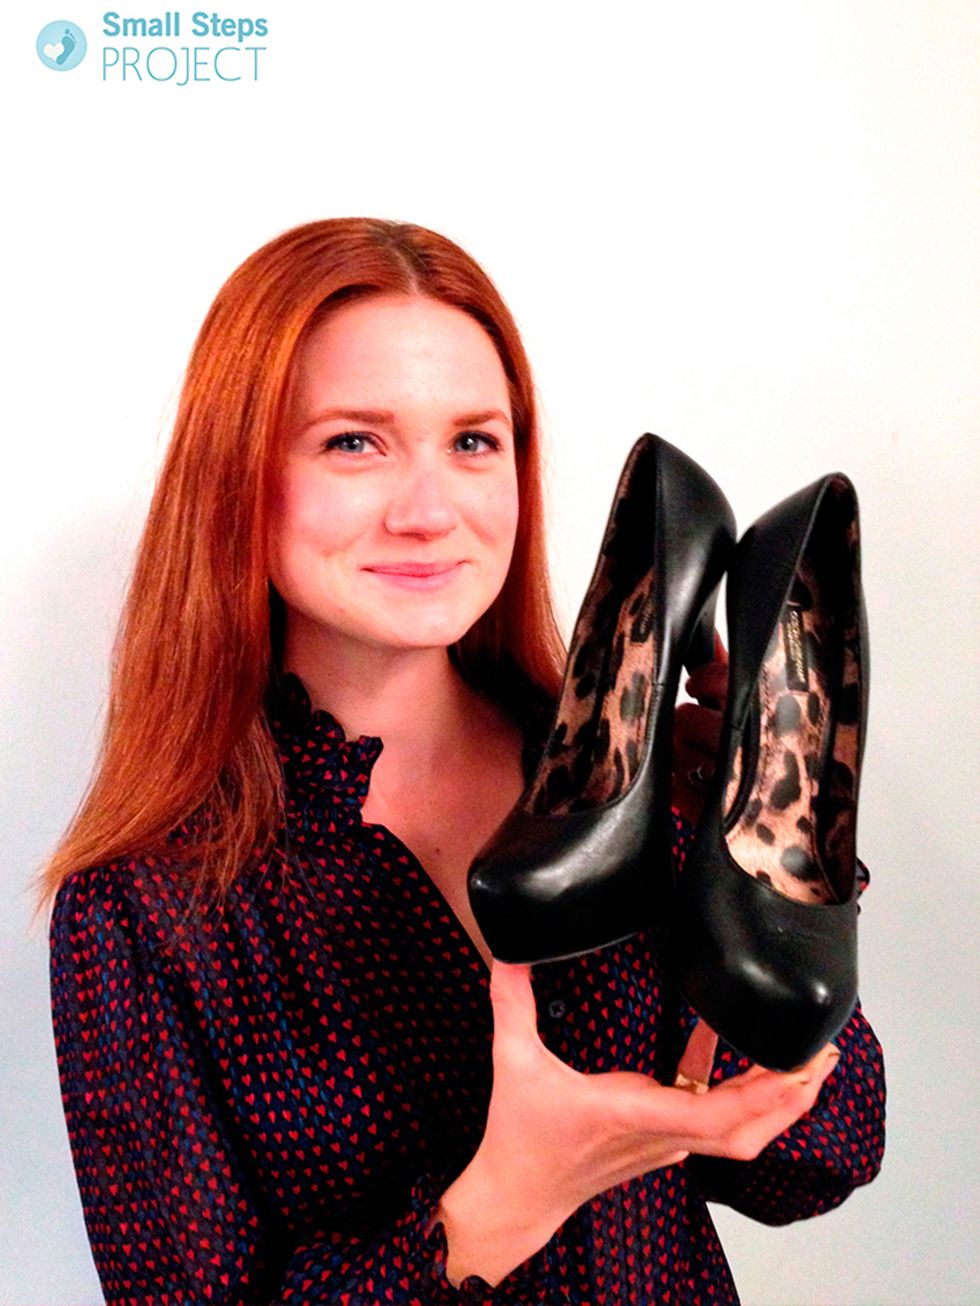 <p><a href="http://www.smallstepsproject.org/portfolio/bonnie-wright/">Bonnie Wright</a> with her shoes.</p>